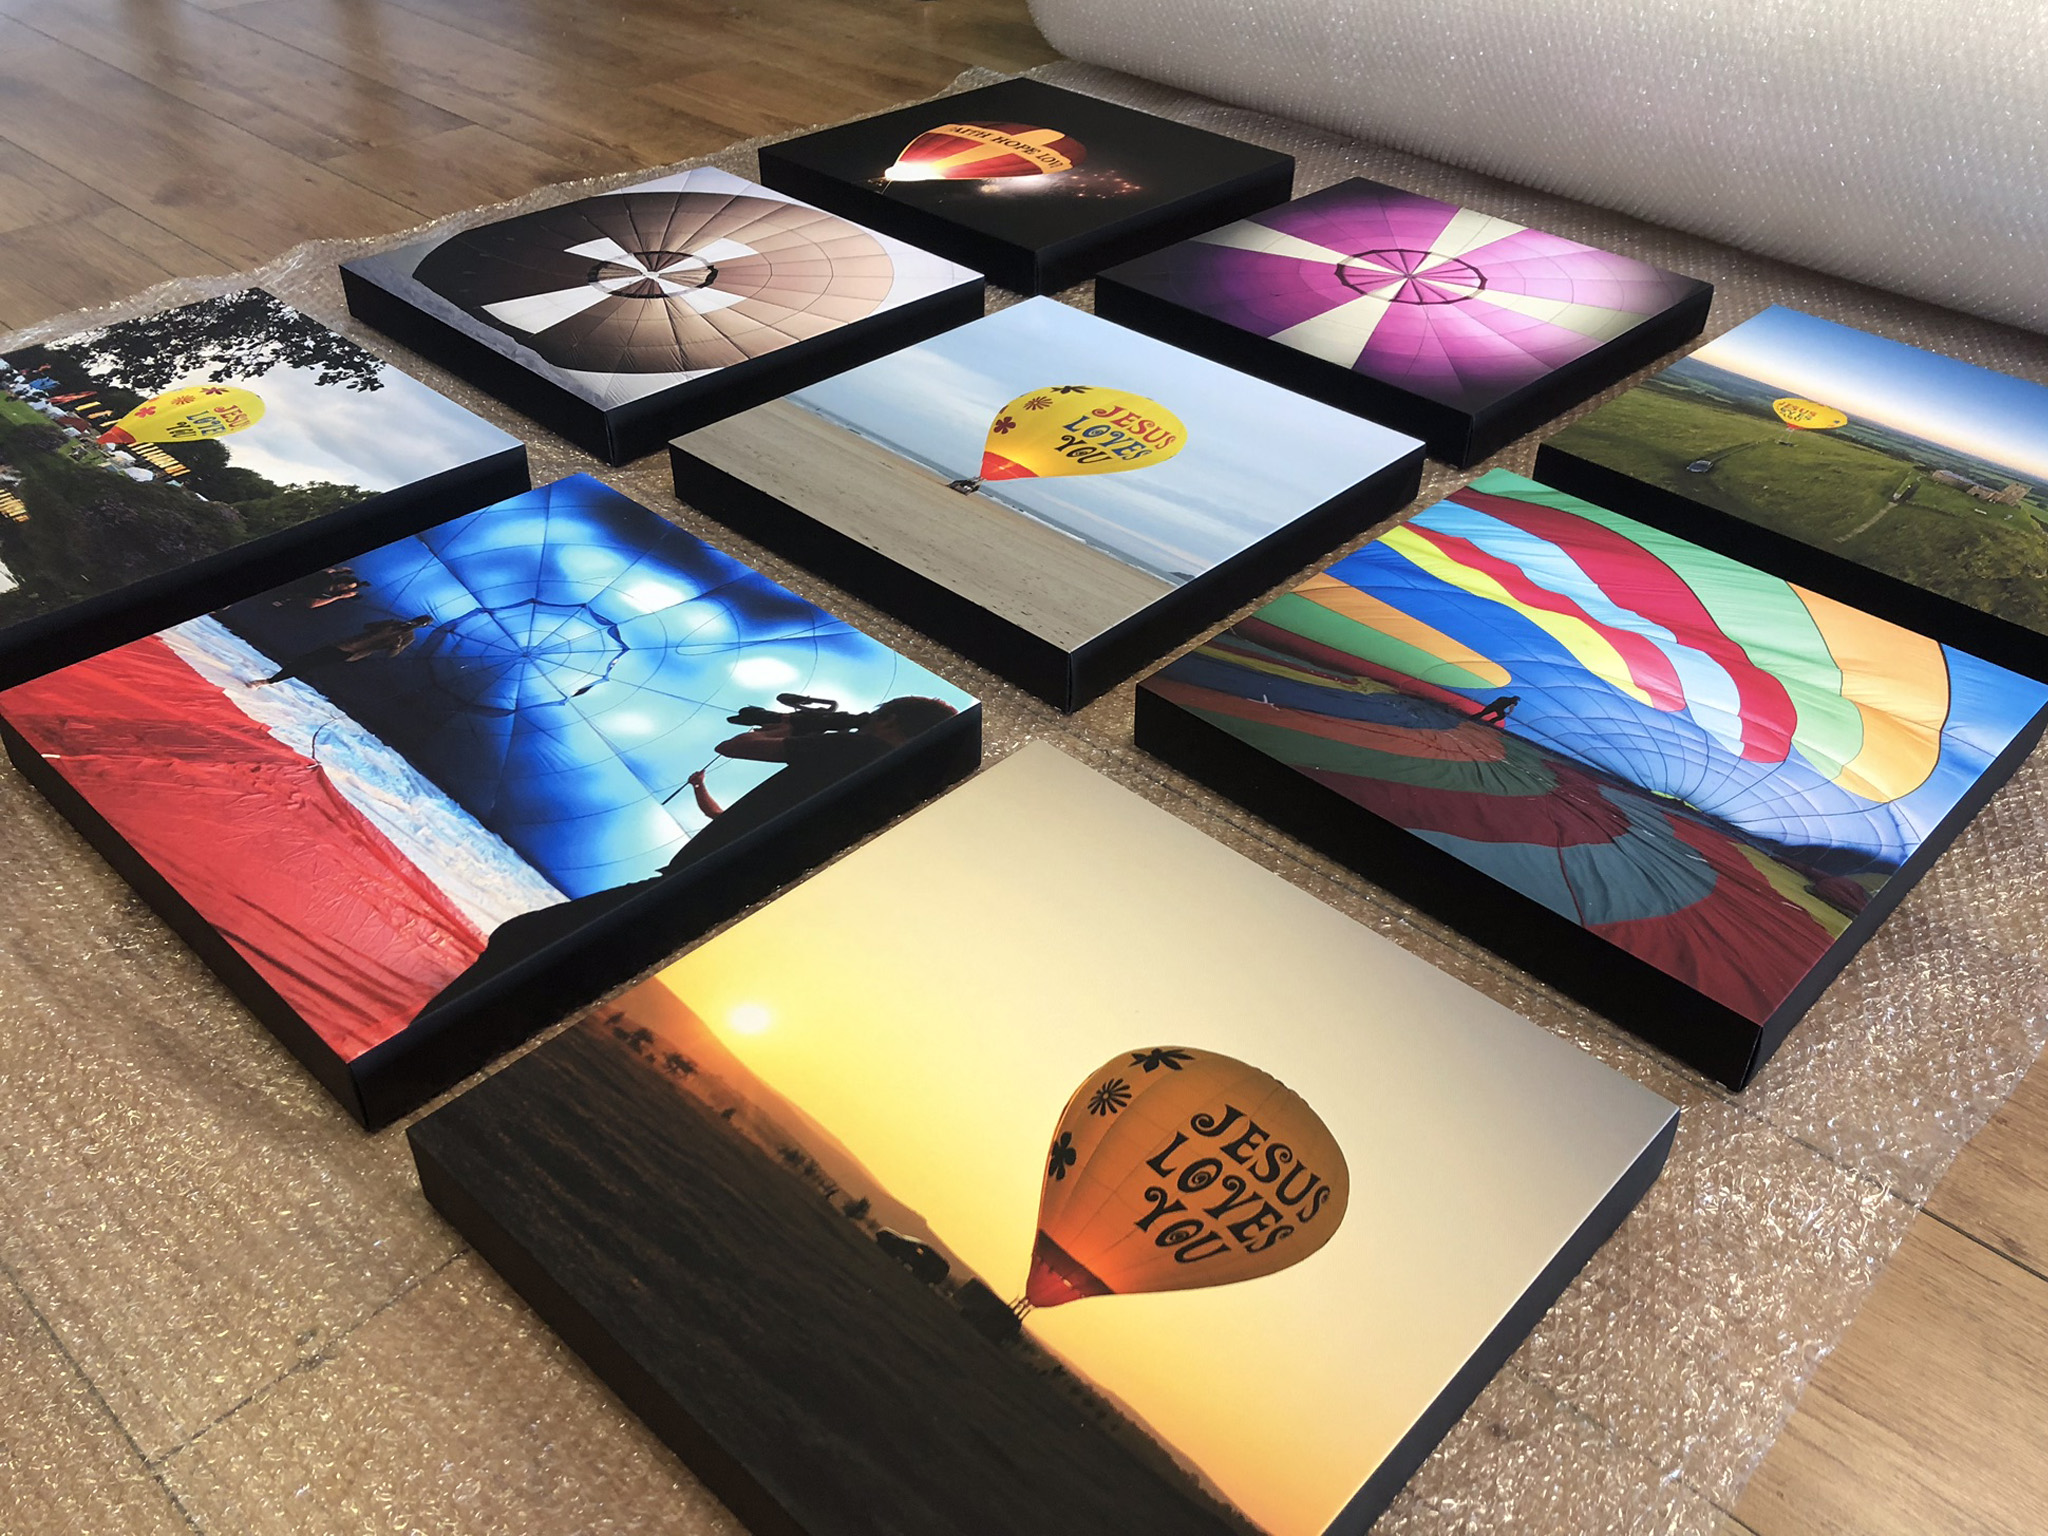 Print your amazing photographs onto canvas, poster or even farme it and display it i your home or give to a friend or family member as the perfect gift! You could even sell your prints too.